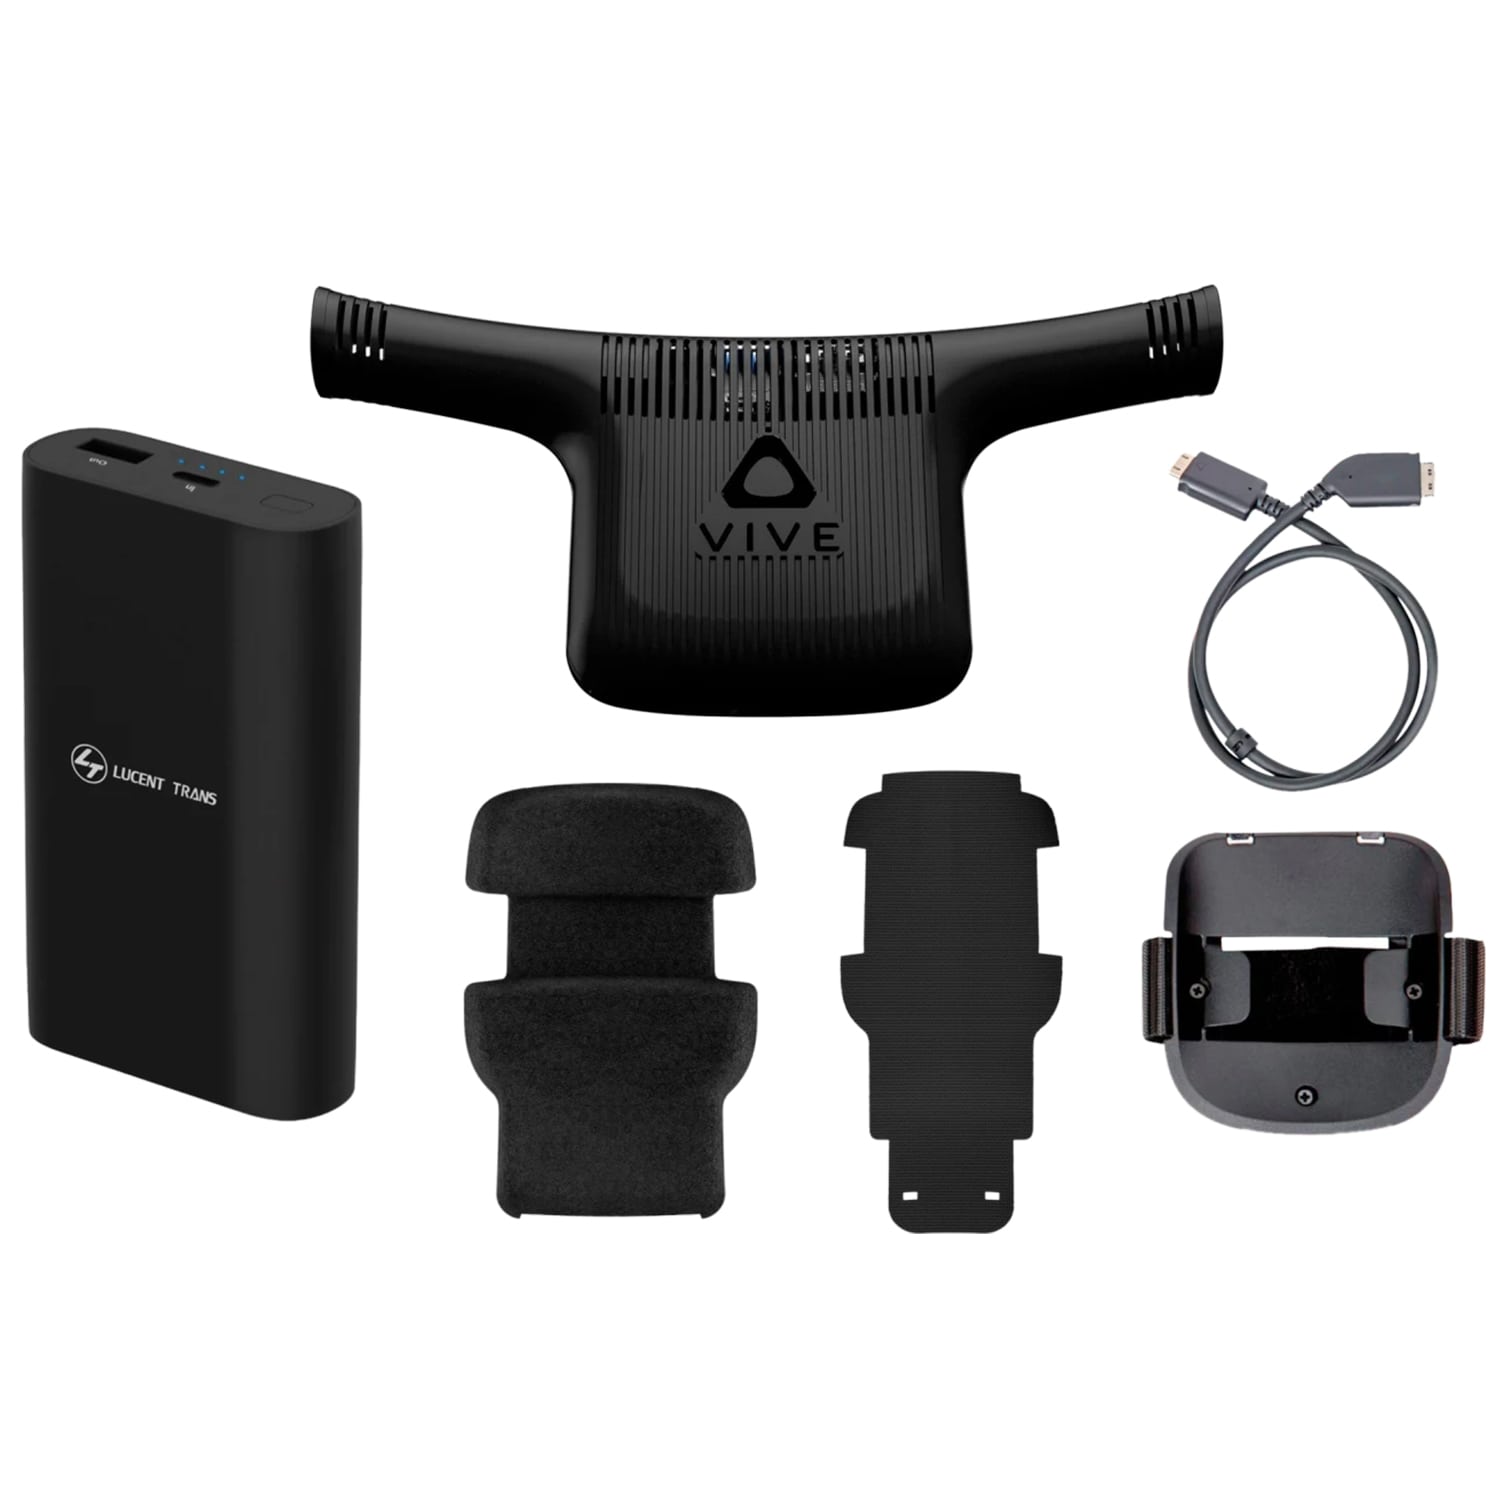 VIVE Wireless Adapter Full Pack (Pro & Cosmos Series)